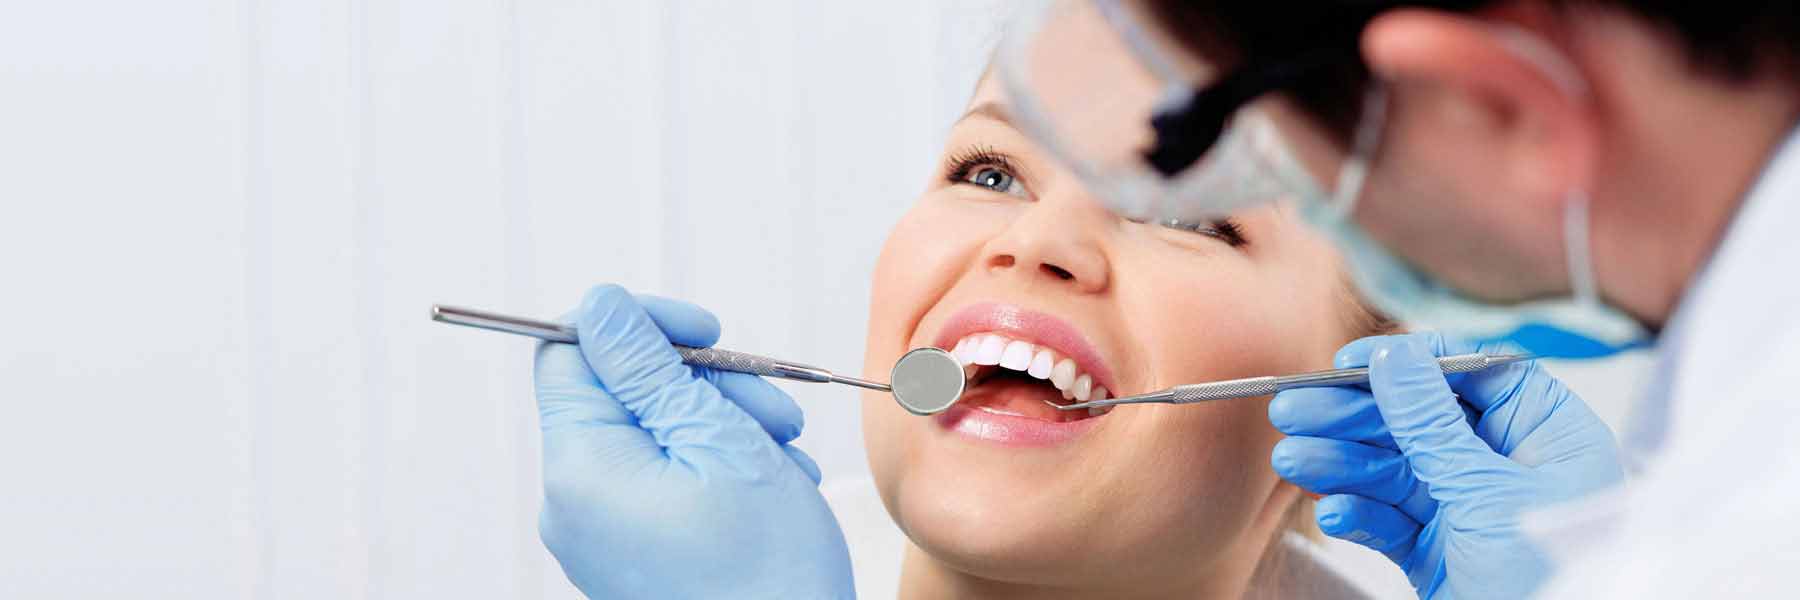 Dental Service in Woodberry - Tooth N Care